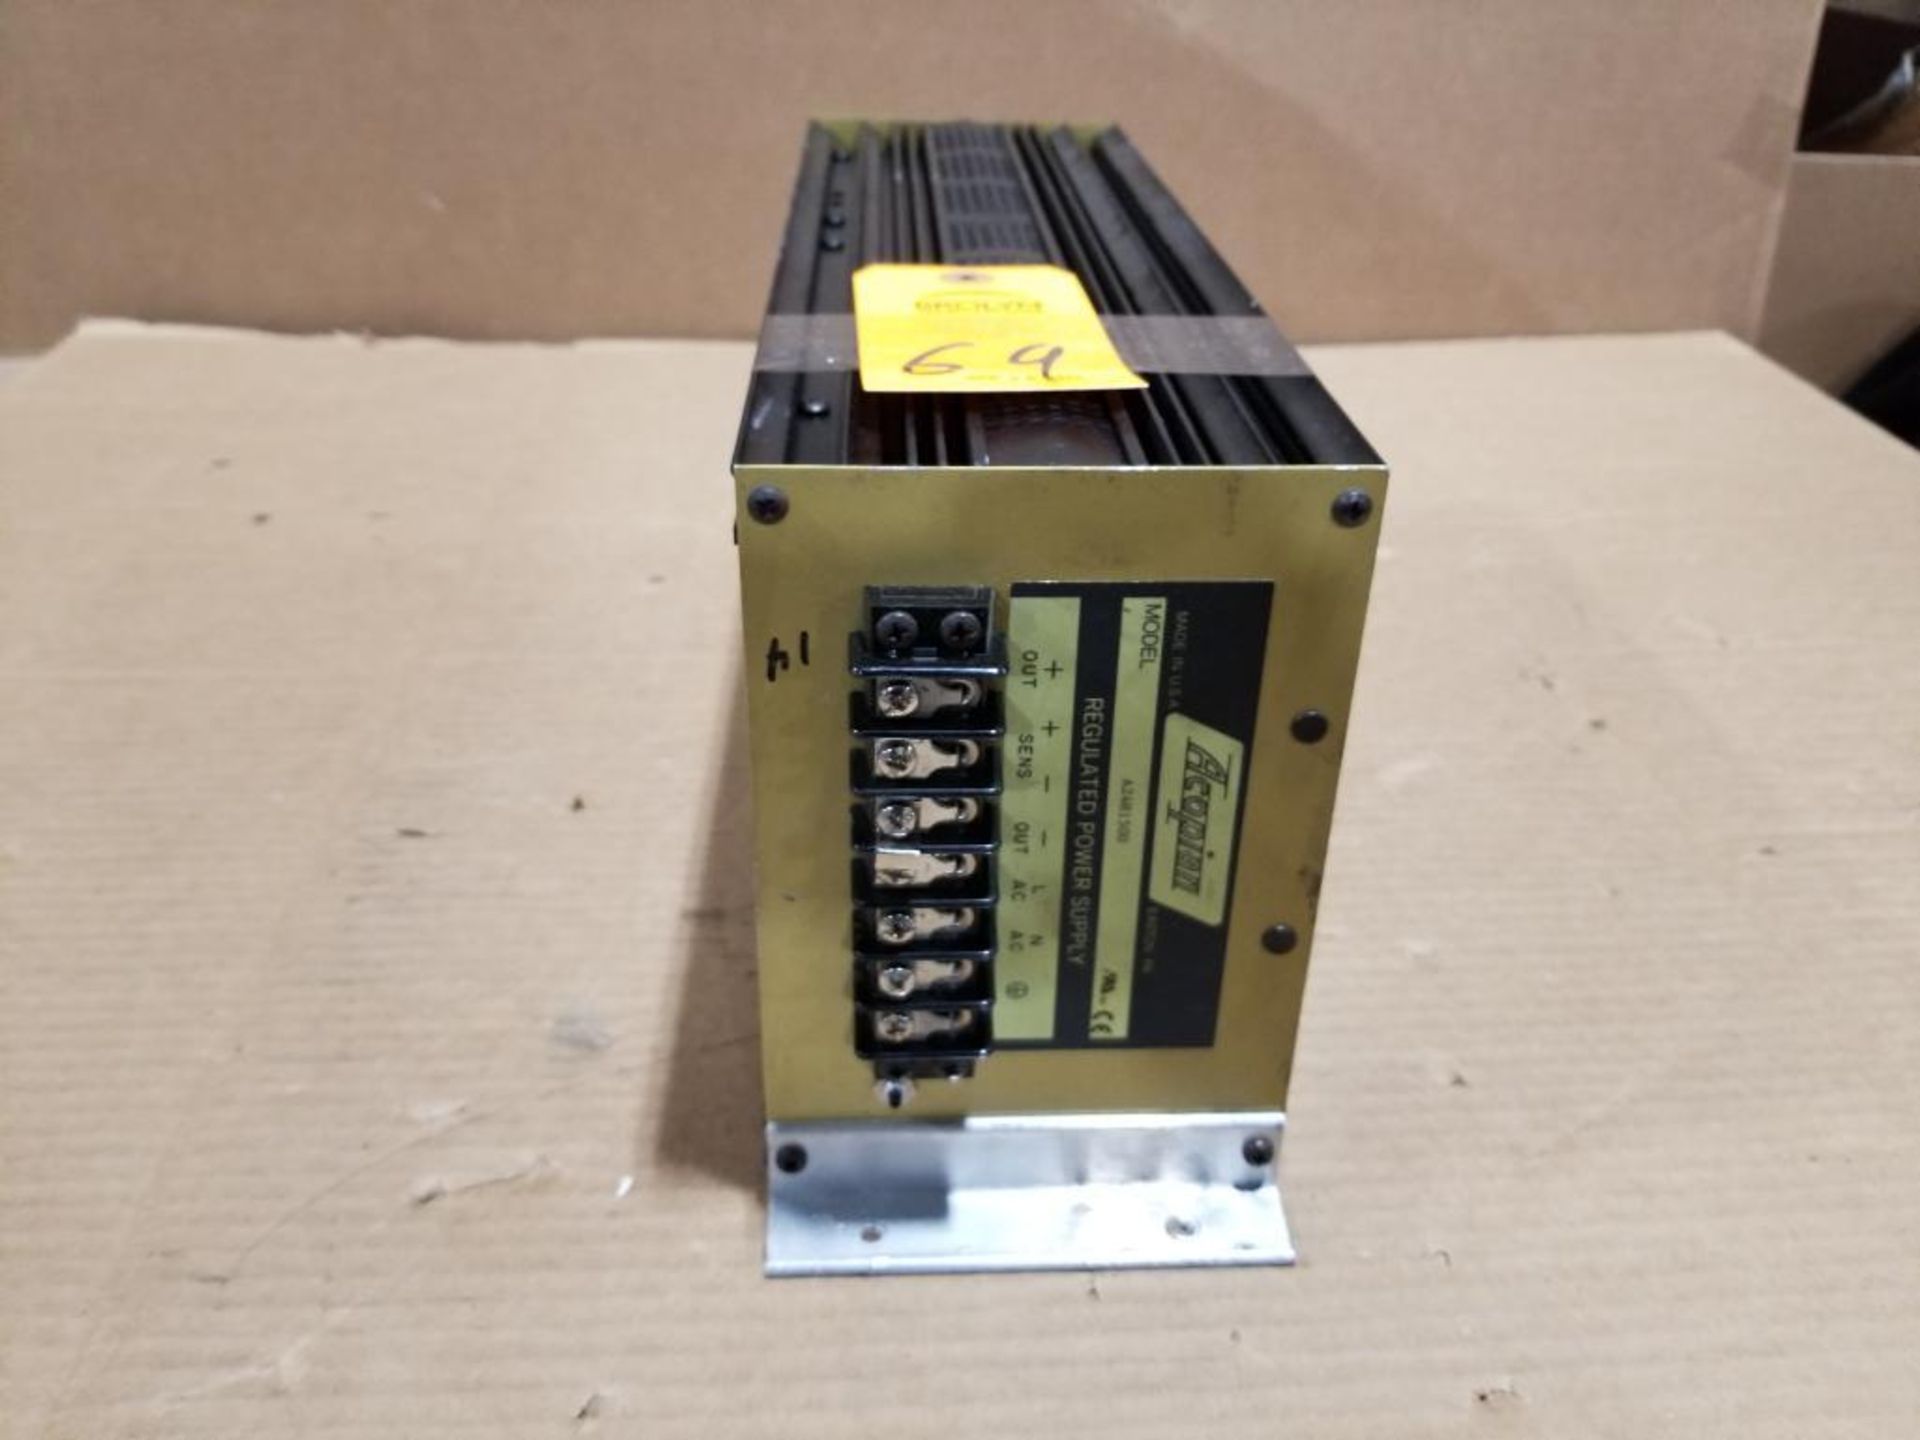 Acopian power supply. Model number A24H1500.